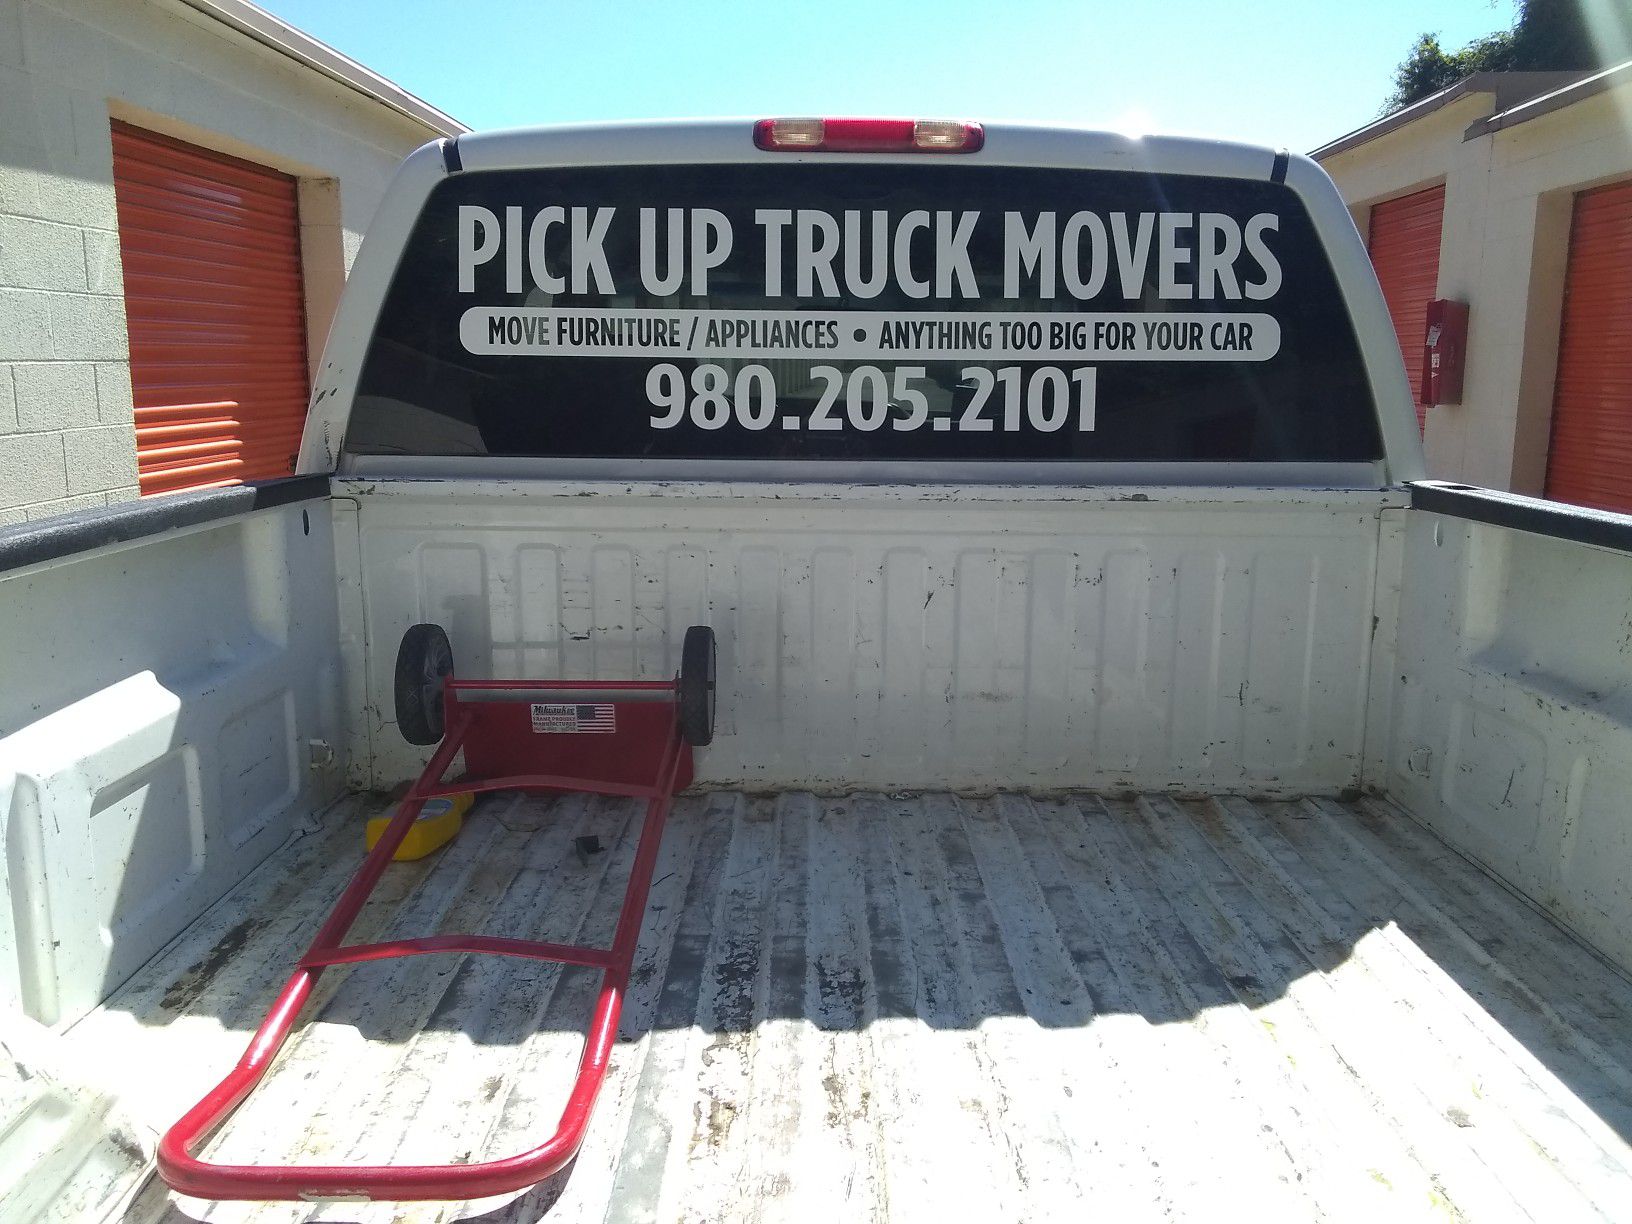 Movers help